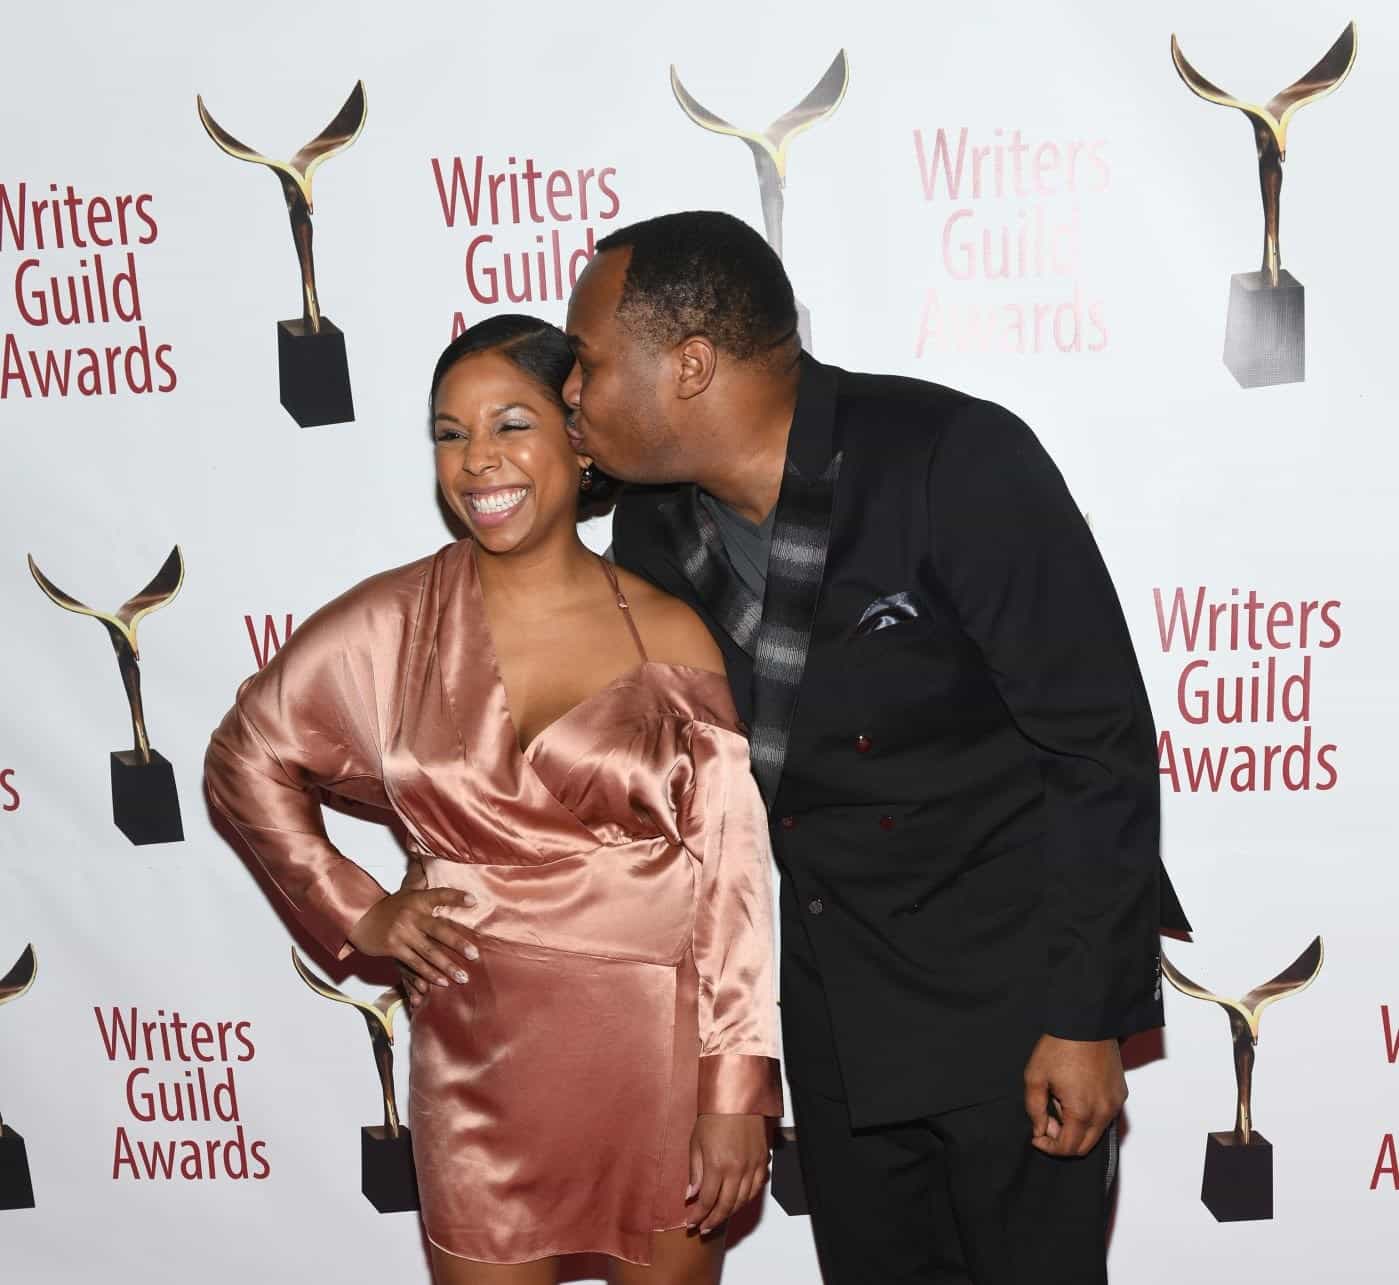 Image of Roy Wood Jr. with his partner, Salone Monet